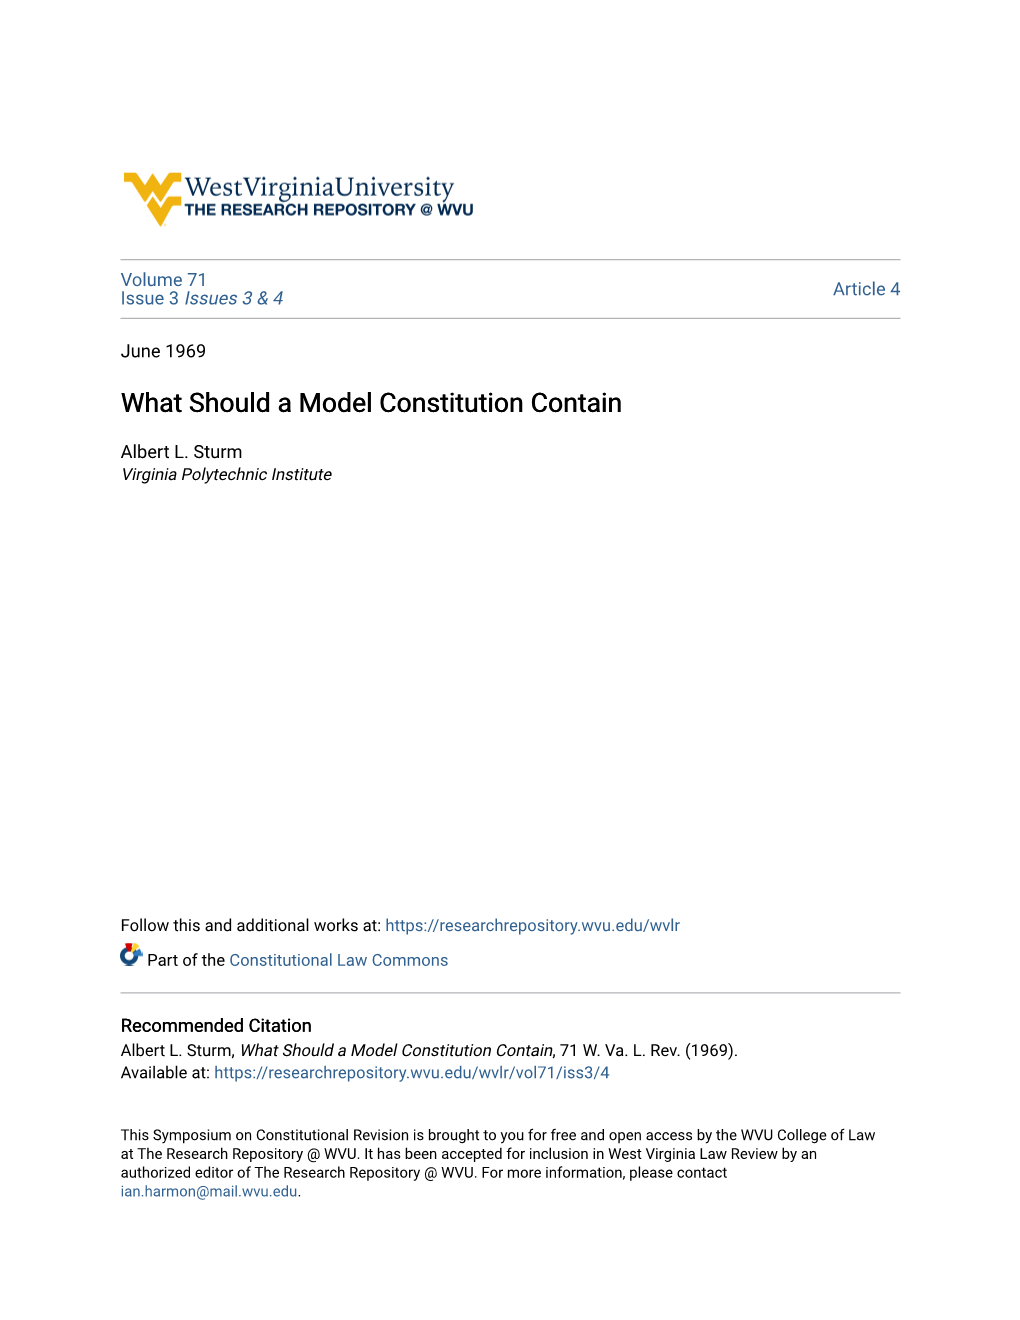 What Should a Model Constitution Contain